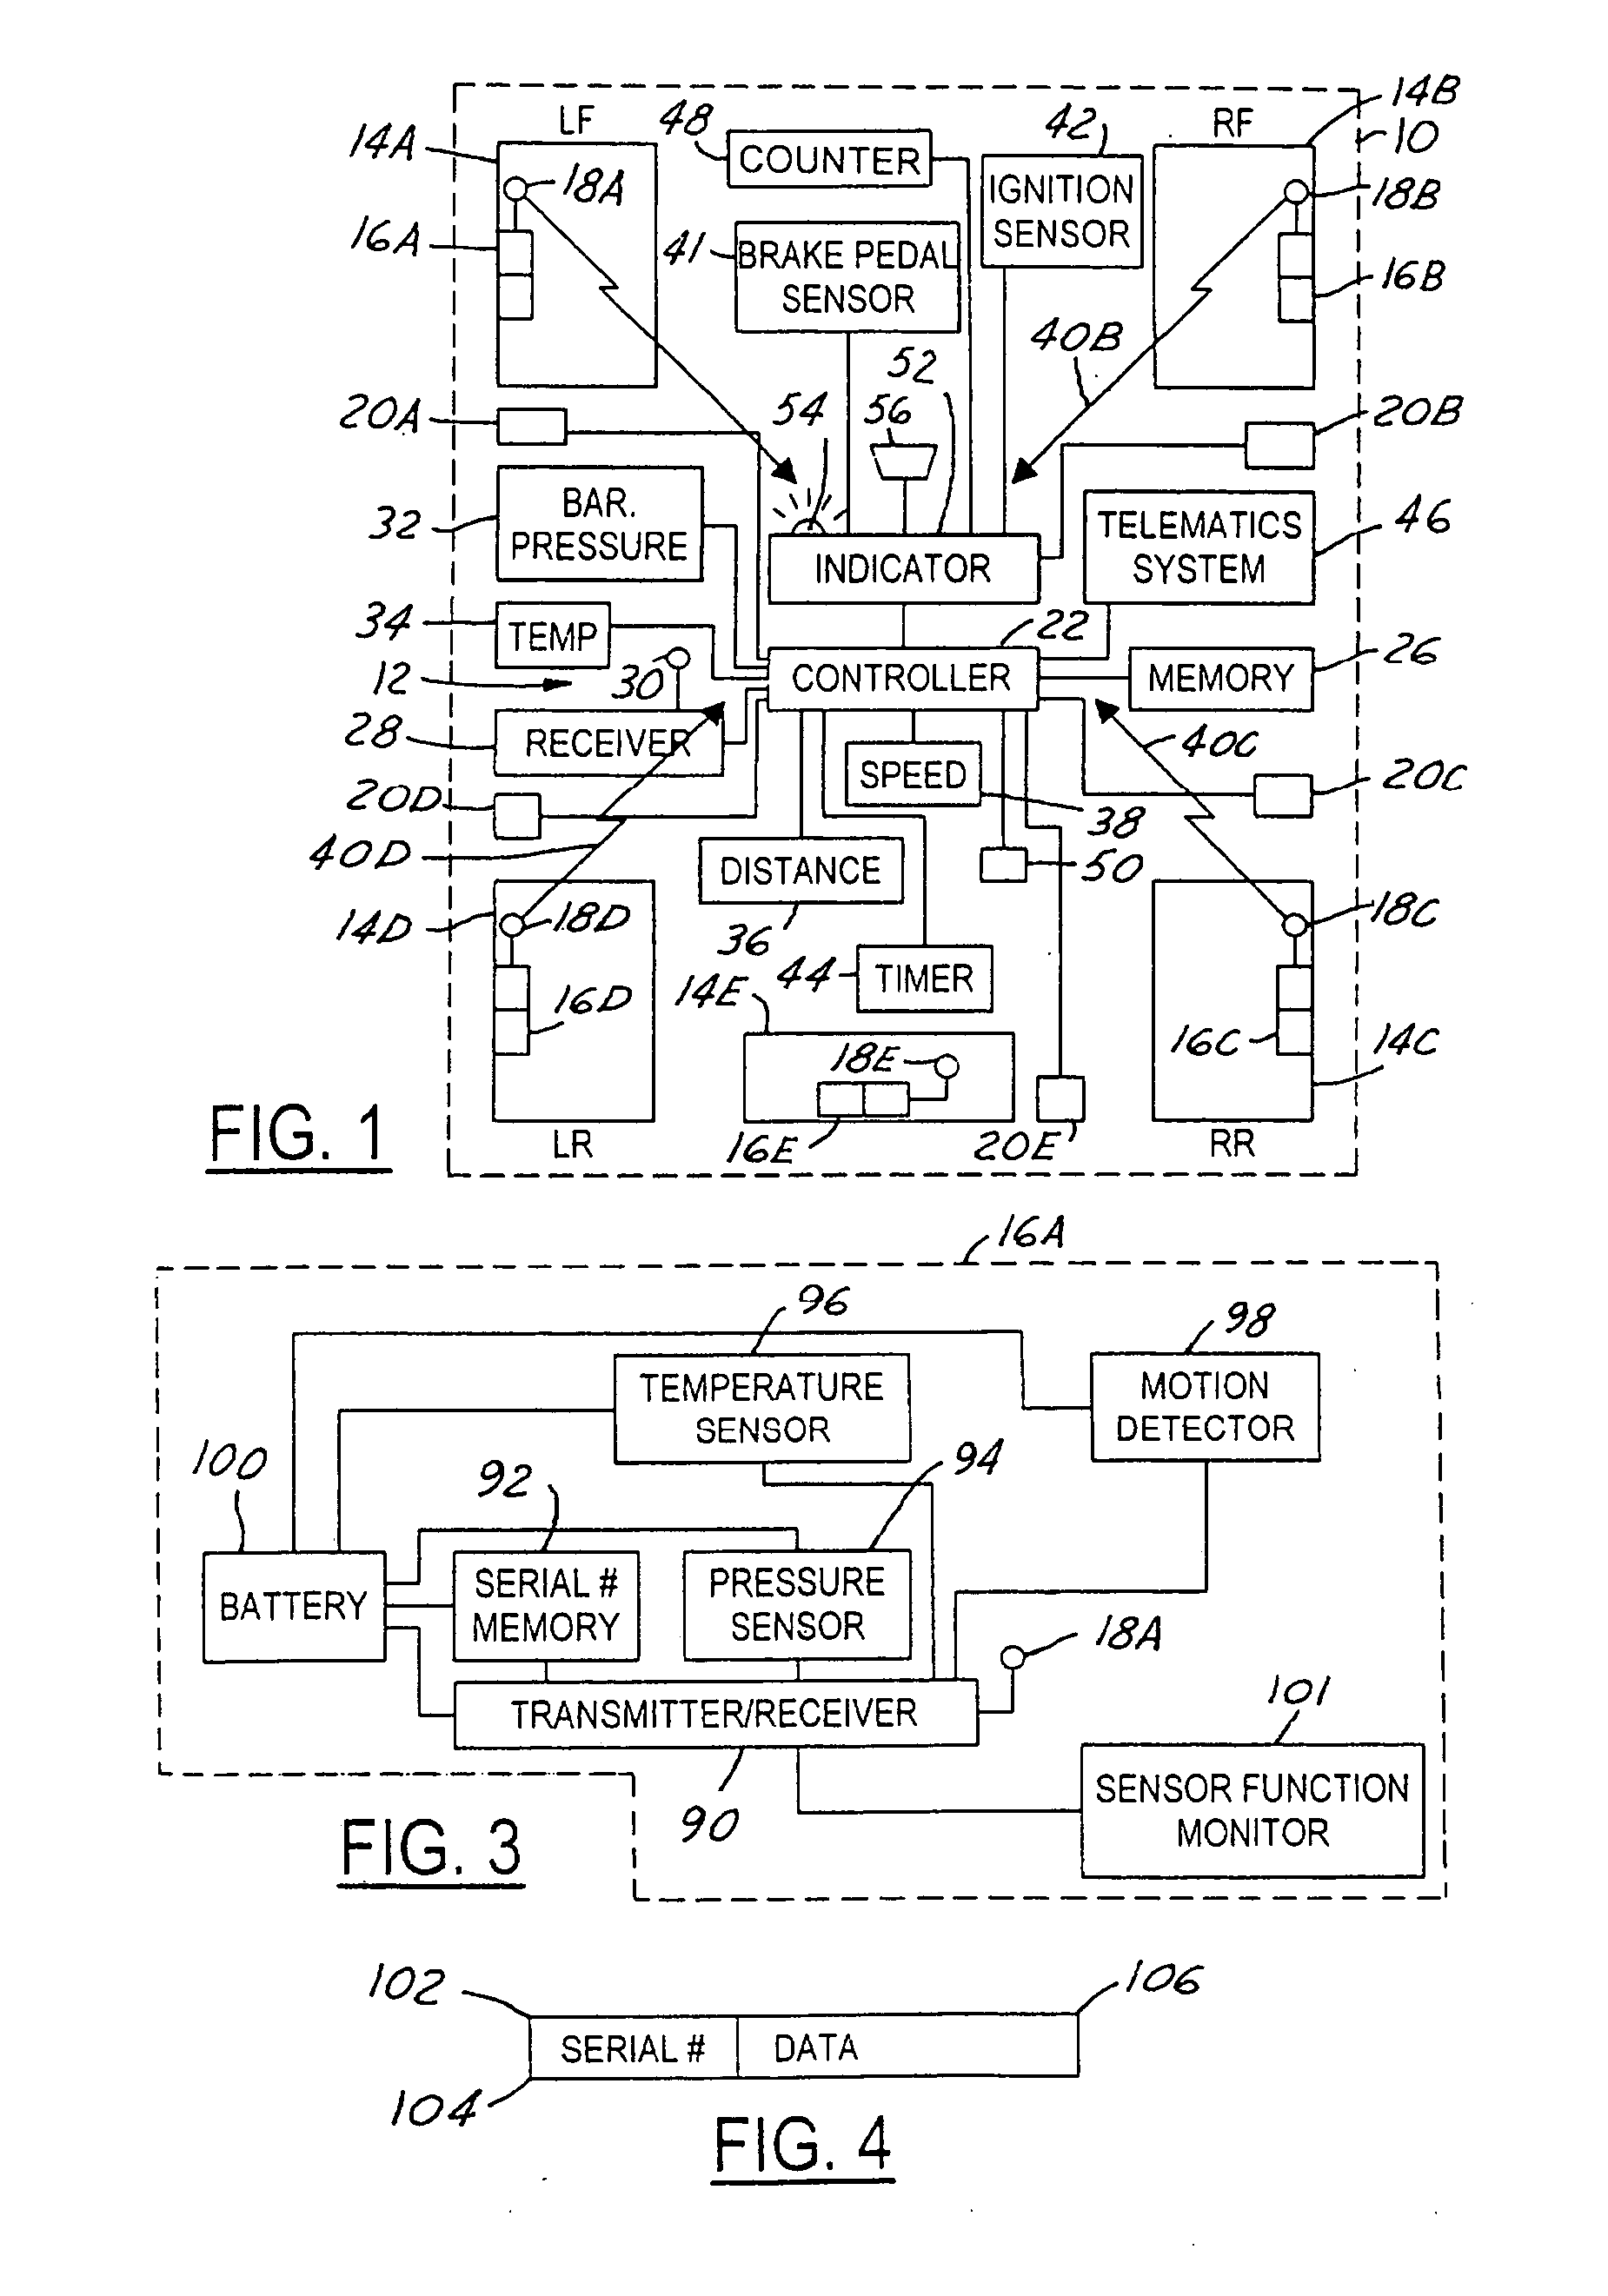 Method and apparatus for detecting leakage rate in a tire pressure monitoring system